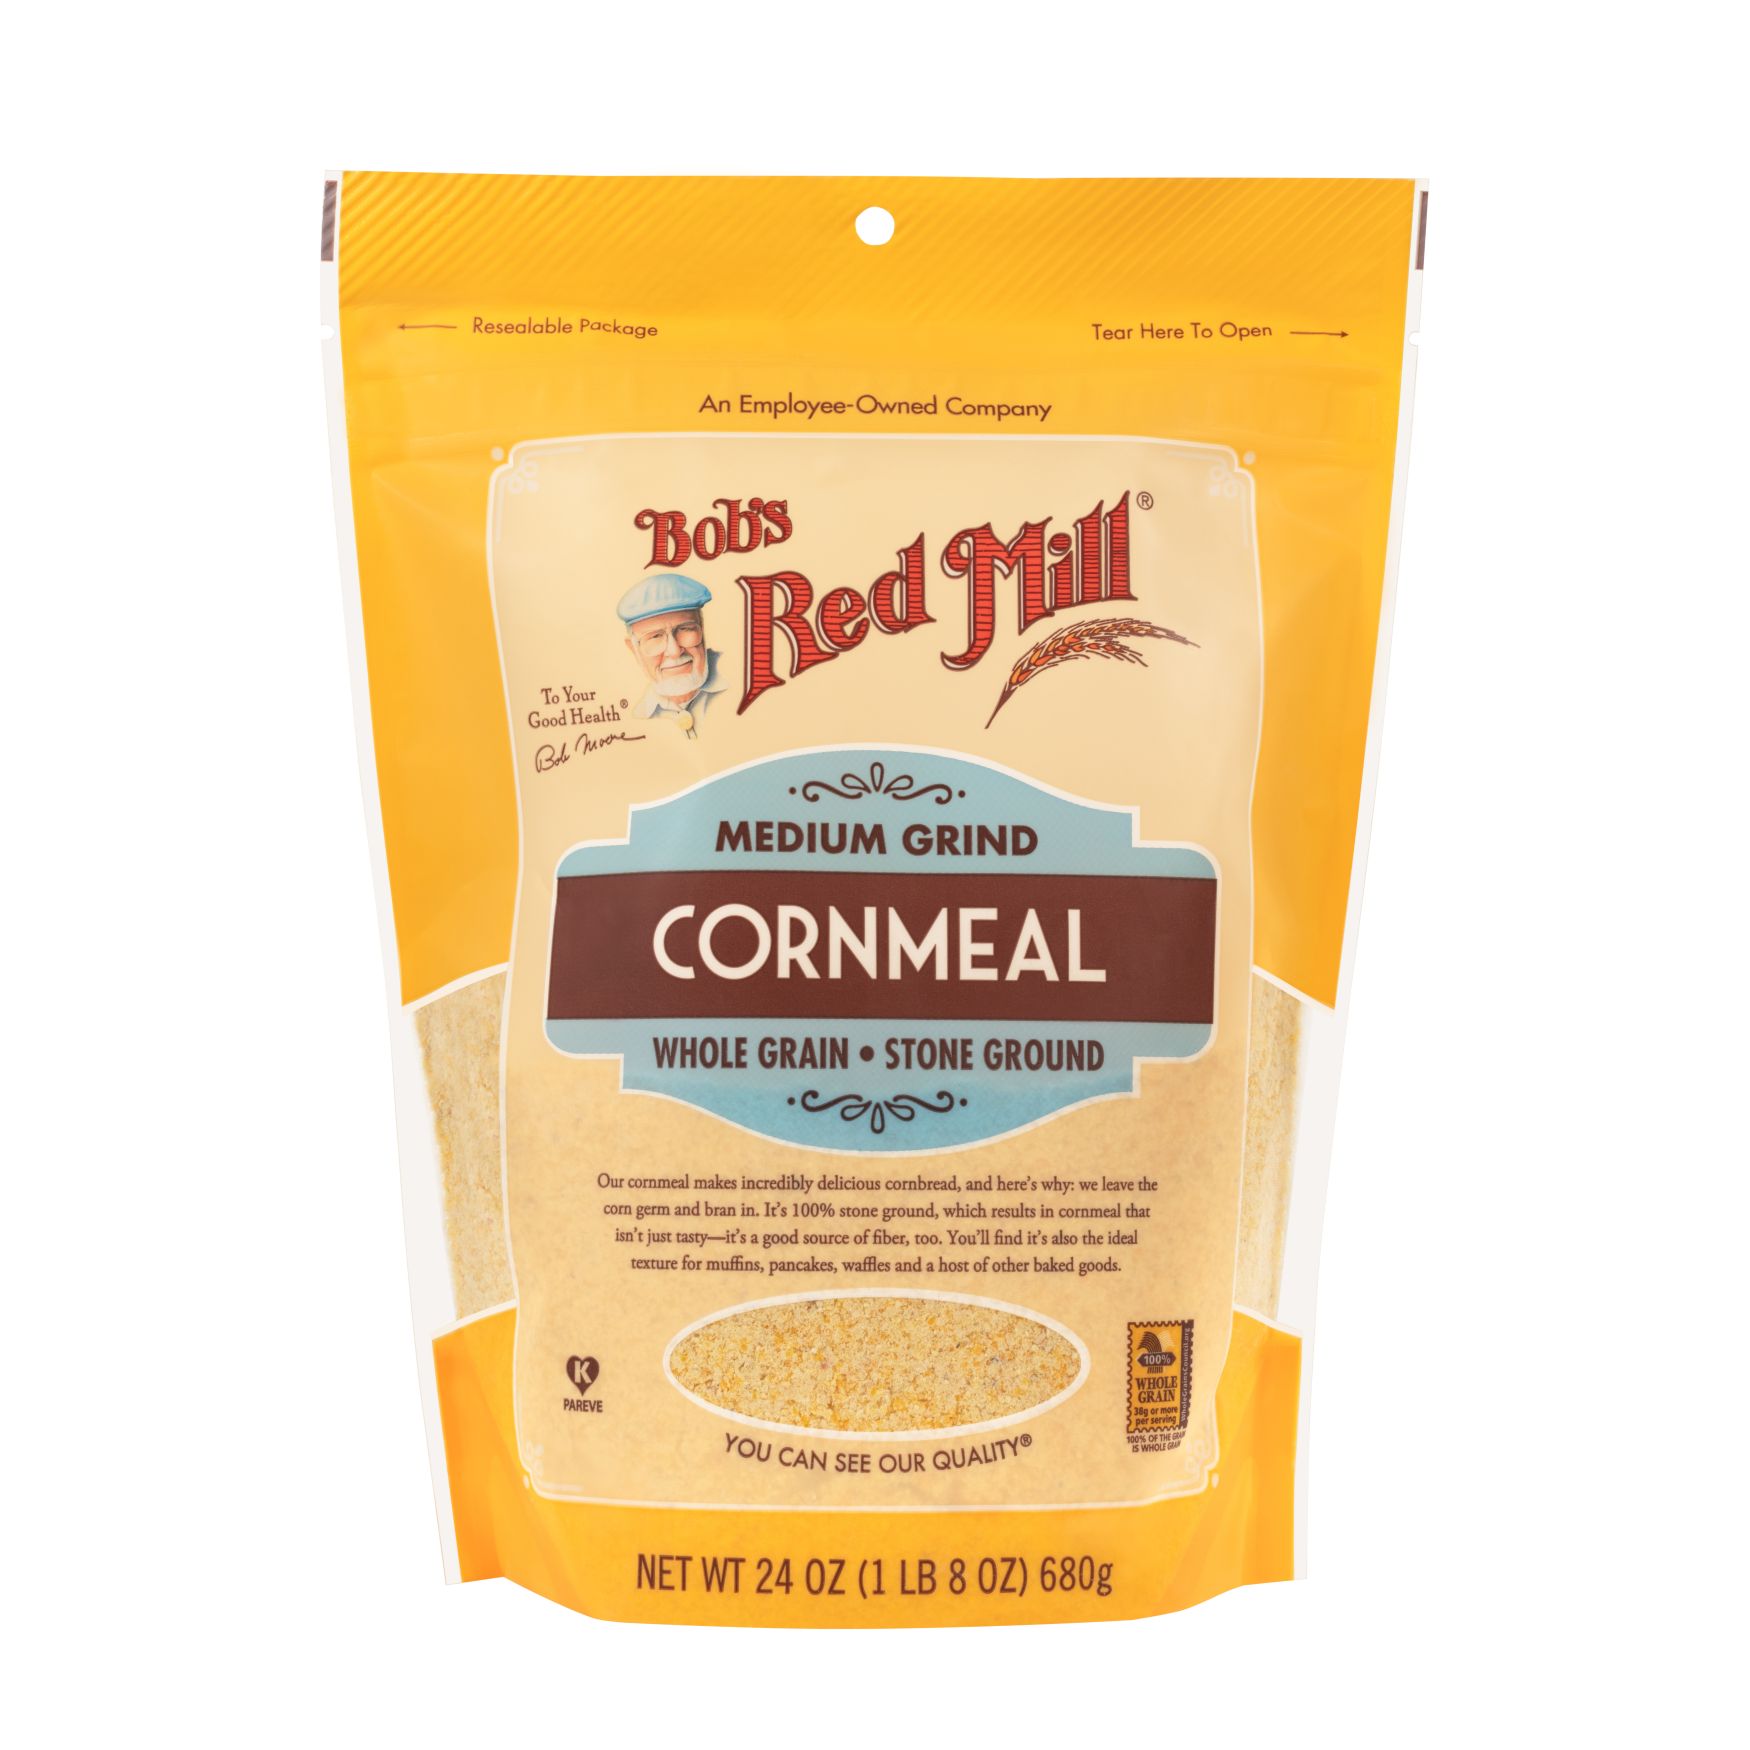 pegs Express Sanctuary Medium Grind Cornmeal :: Bob's Red Mill Natural Foods